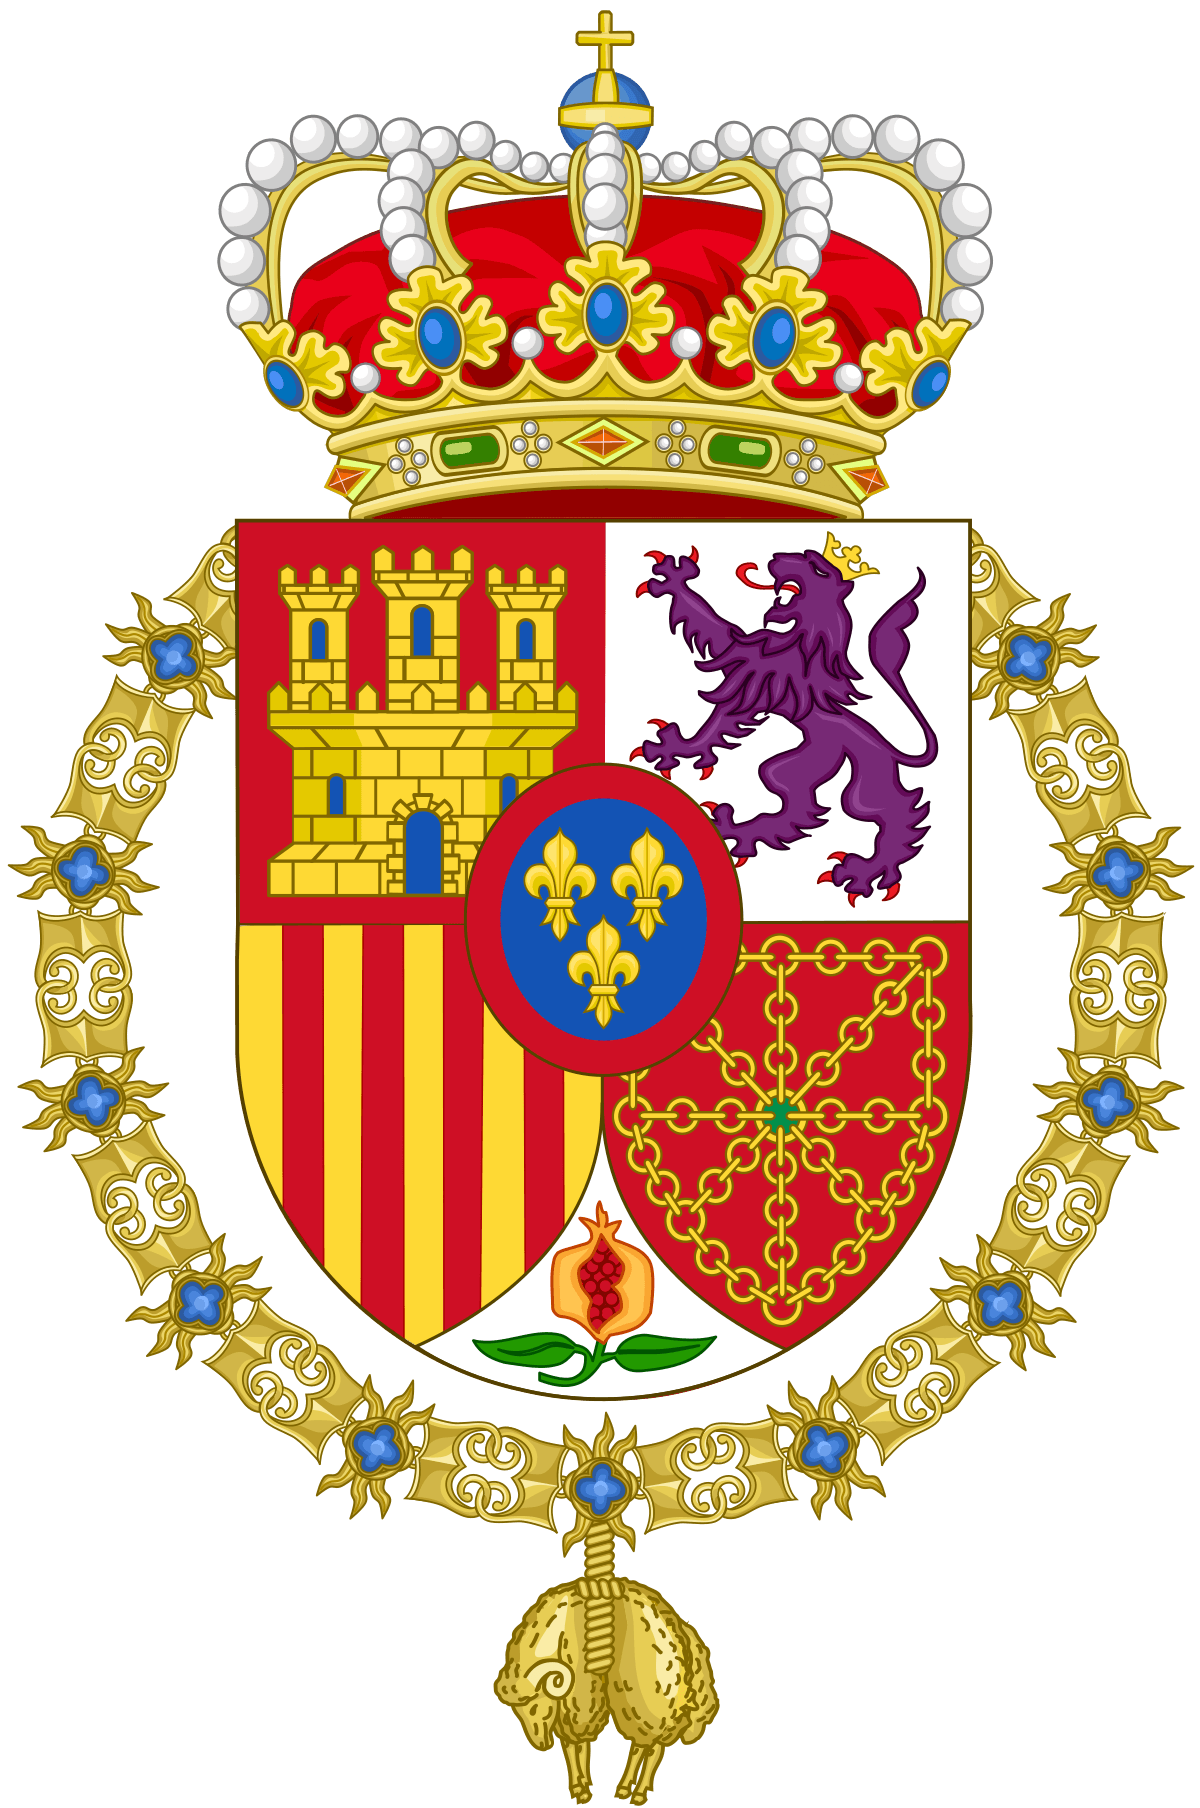 Red Yellow B with Crown Logo - List of titles and honours of the Spanish Crown